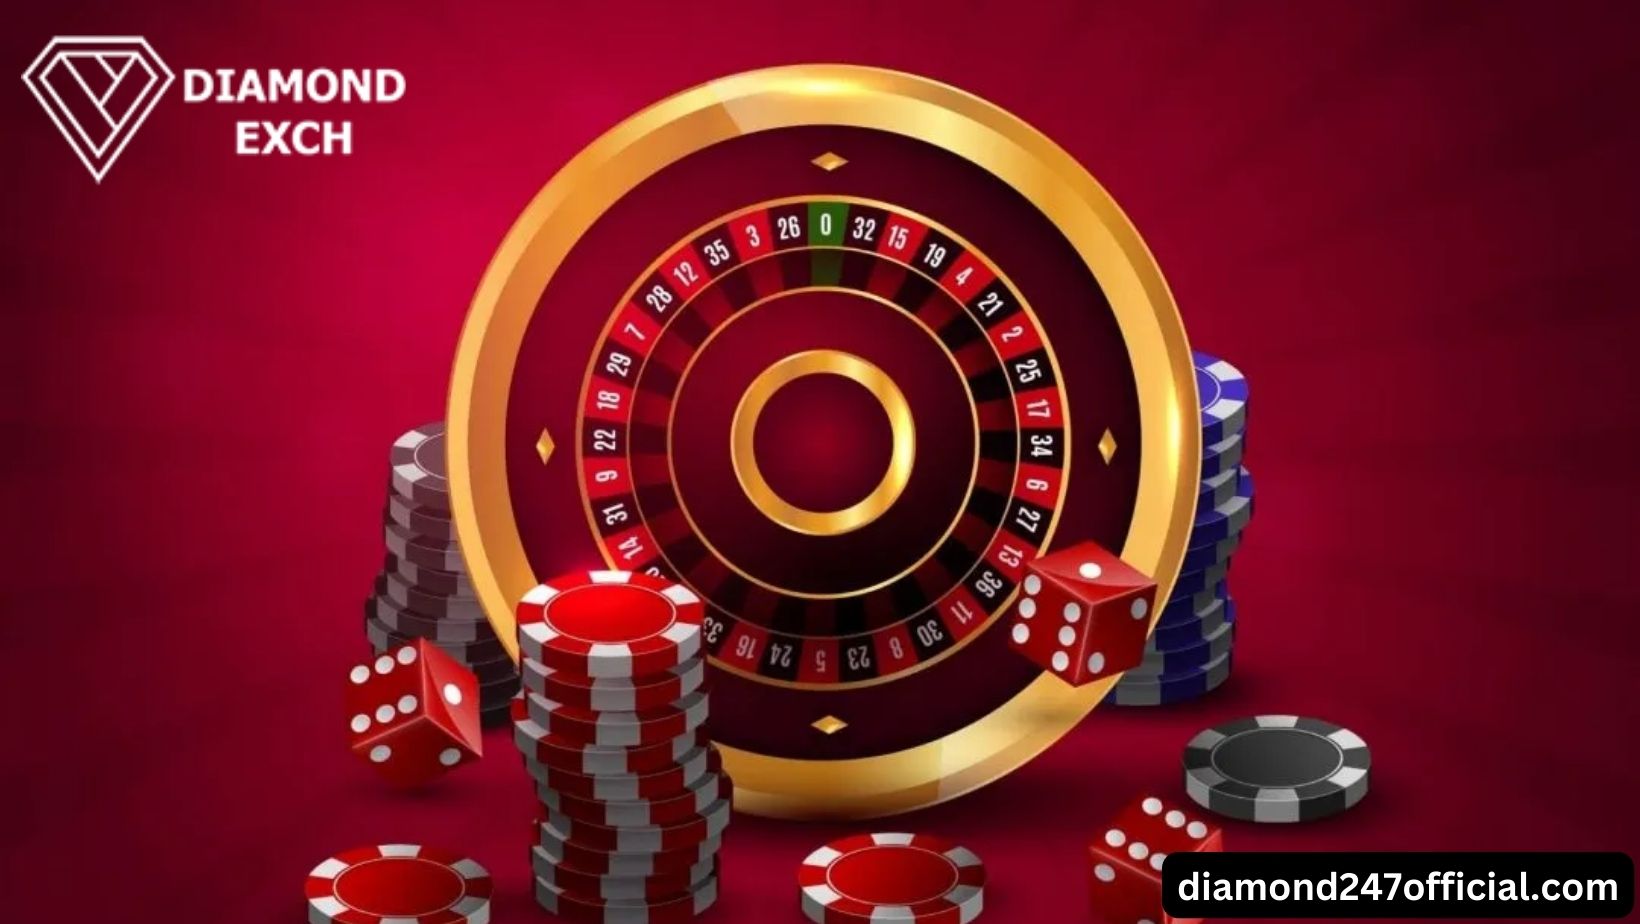 Now You Can Play Casino Games Online At Diamond Exch